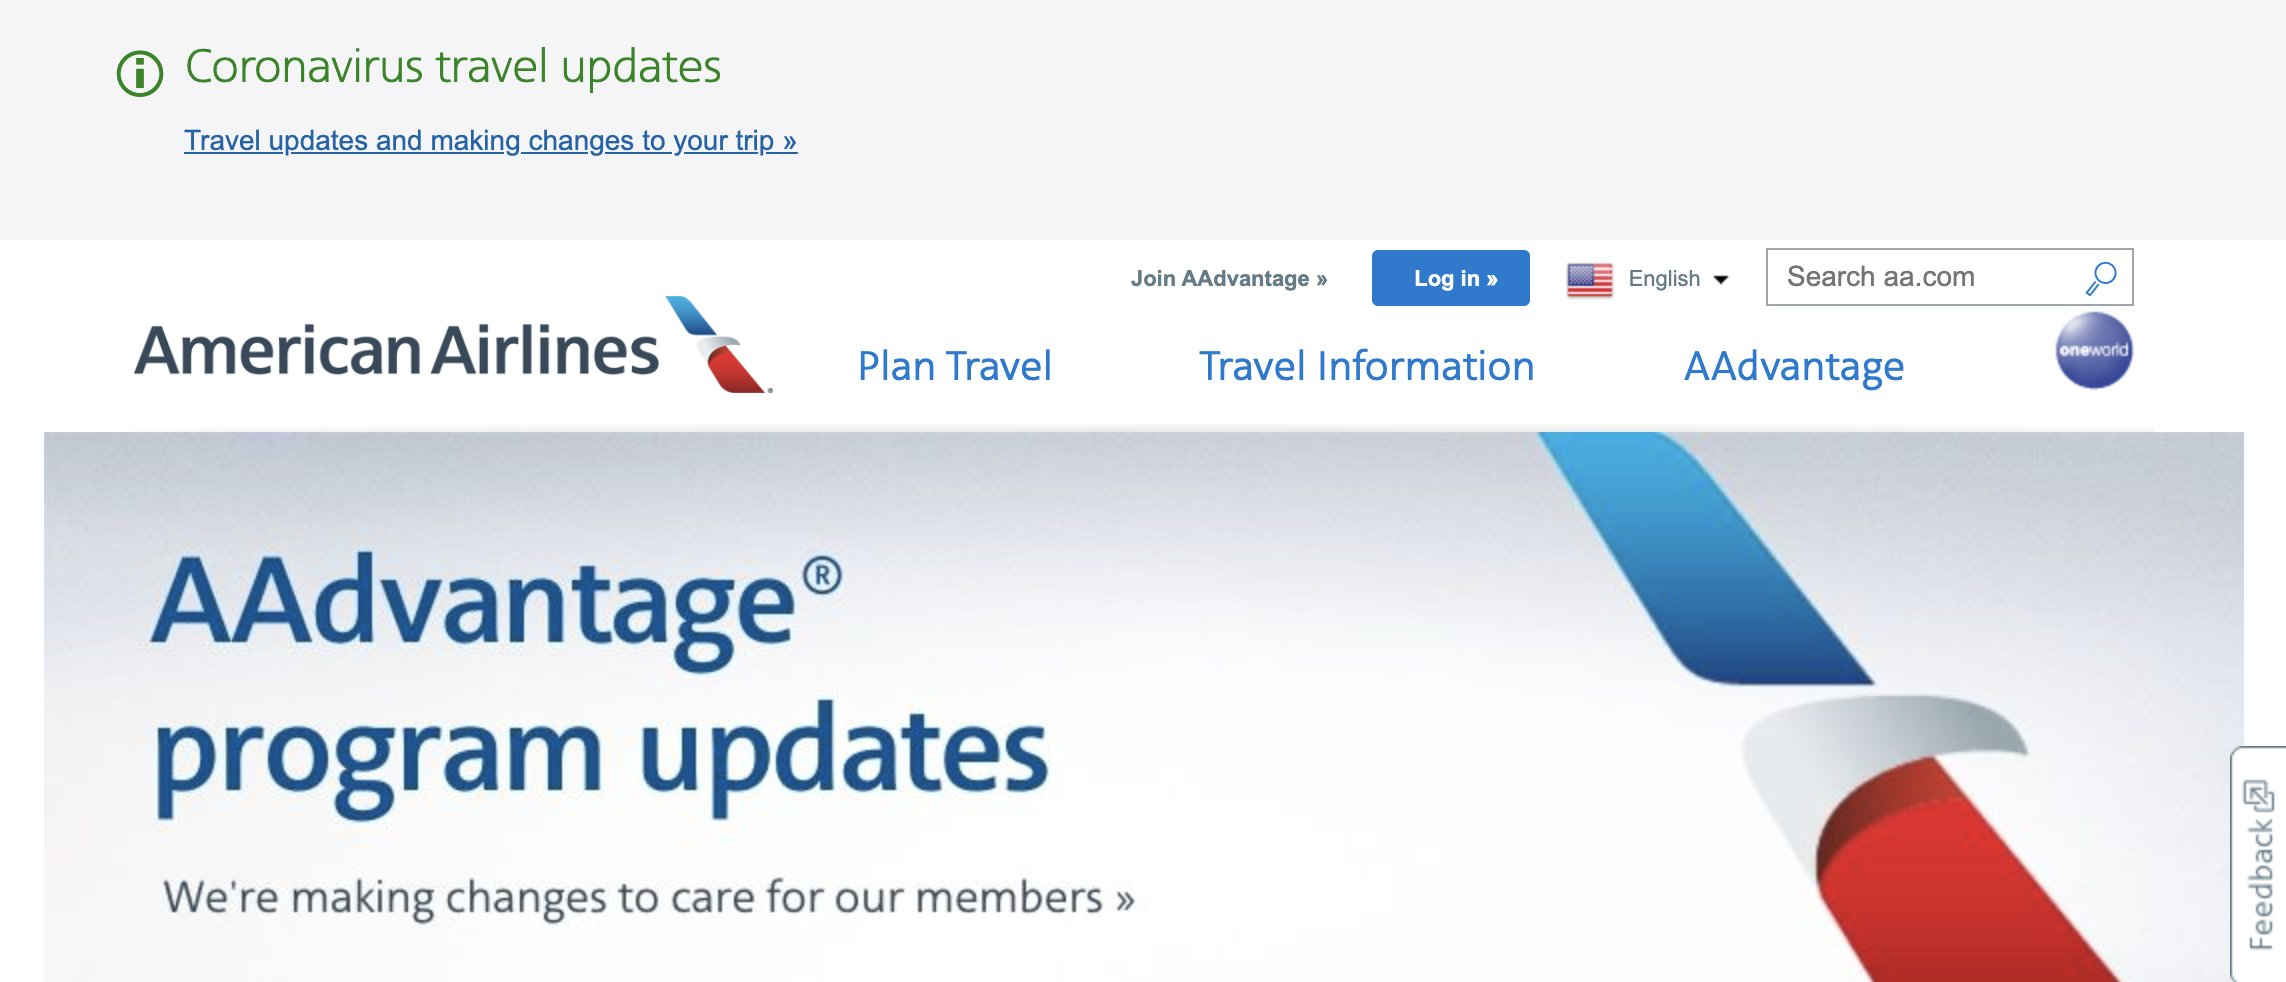 The American Airlines homepage. At the top of the homepage is a light gray banner that takes up about a quarter of the screen. It has an icon, a headline, and a call-to-action link. The icon is a green circle with a lowercase i inside of it, commonly used to indicate information. The headline reads, 'Coronavirus travel updates'. The call-to-action link reads, 'Travel updates and making changes to your trip'. Underneath the banner is the rest of the homepage content, including a large banner advertising AAdvantage program updates.